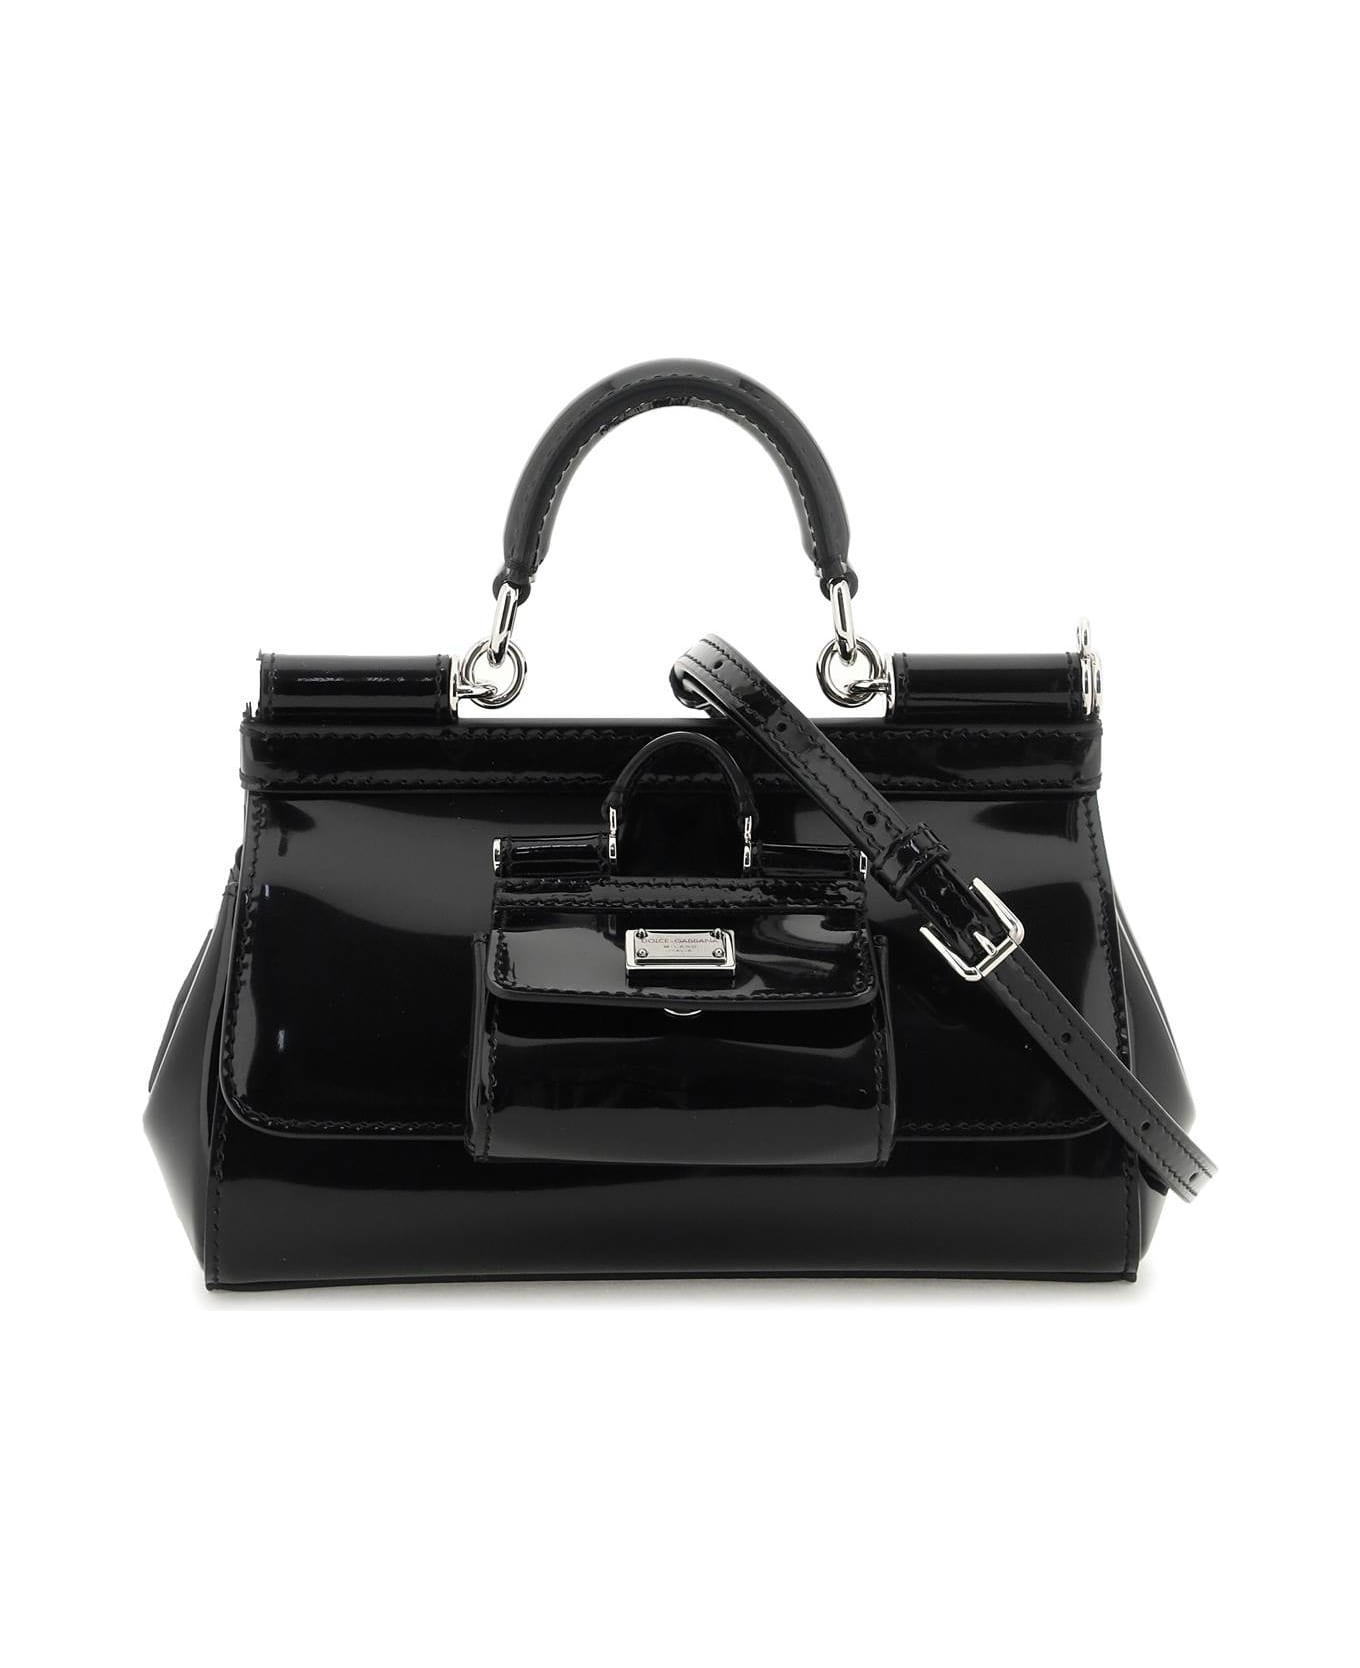 Dolce & Gabbana Patent Leather Small 'sicily' Bag With Coin Purse - Black トートバッグ